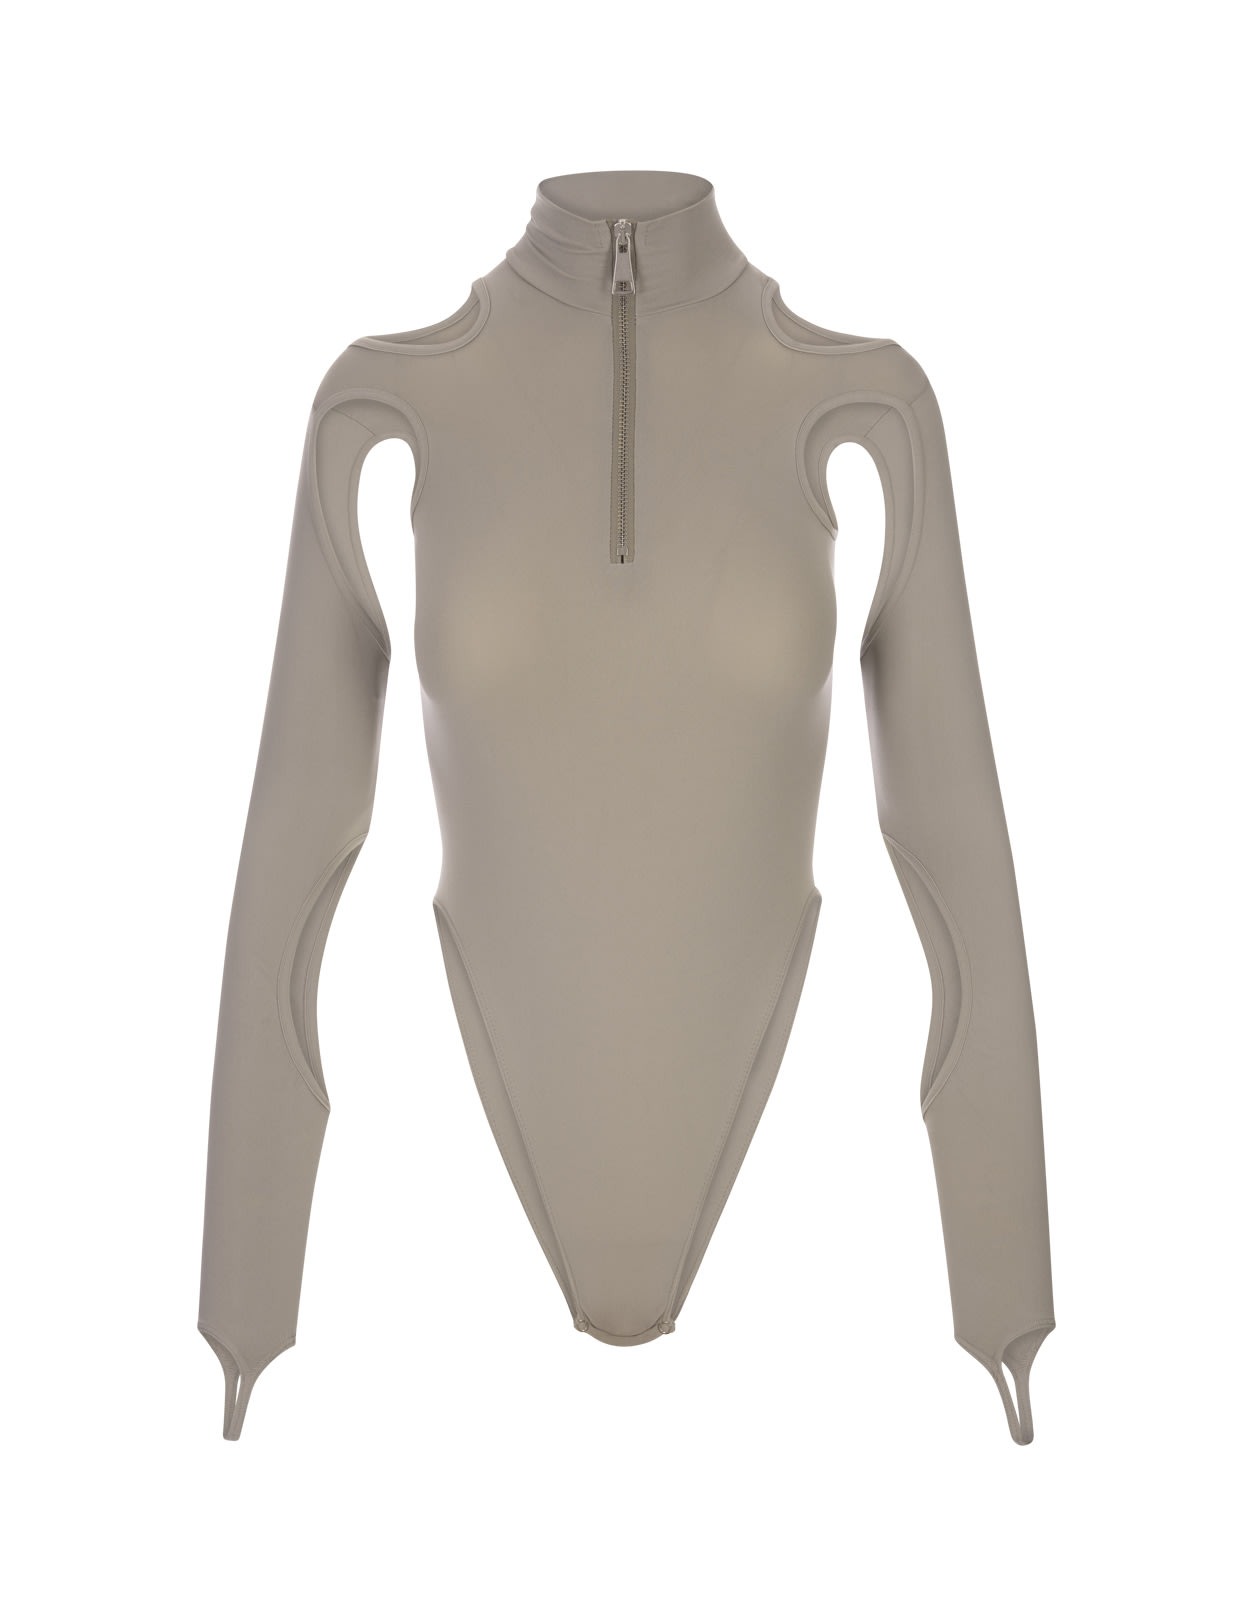 ANDREĀDAMO Taupe Body Top With Cut-out